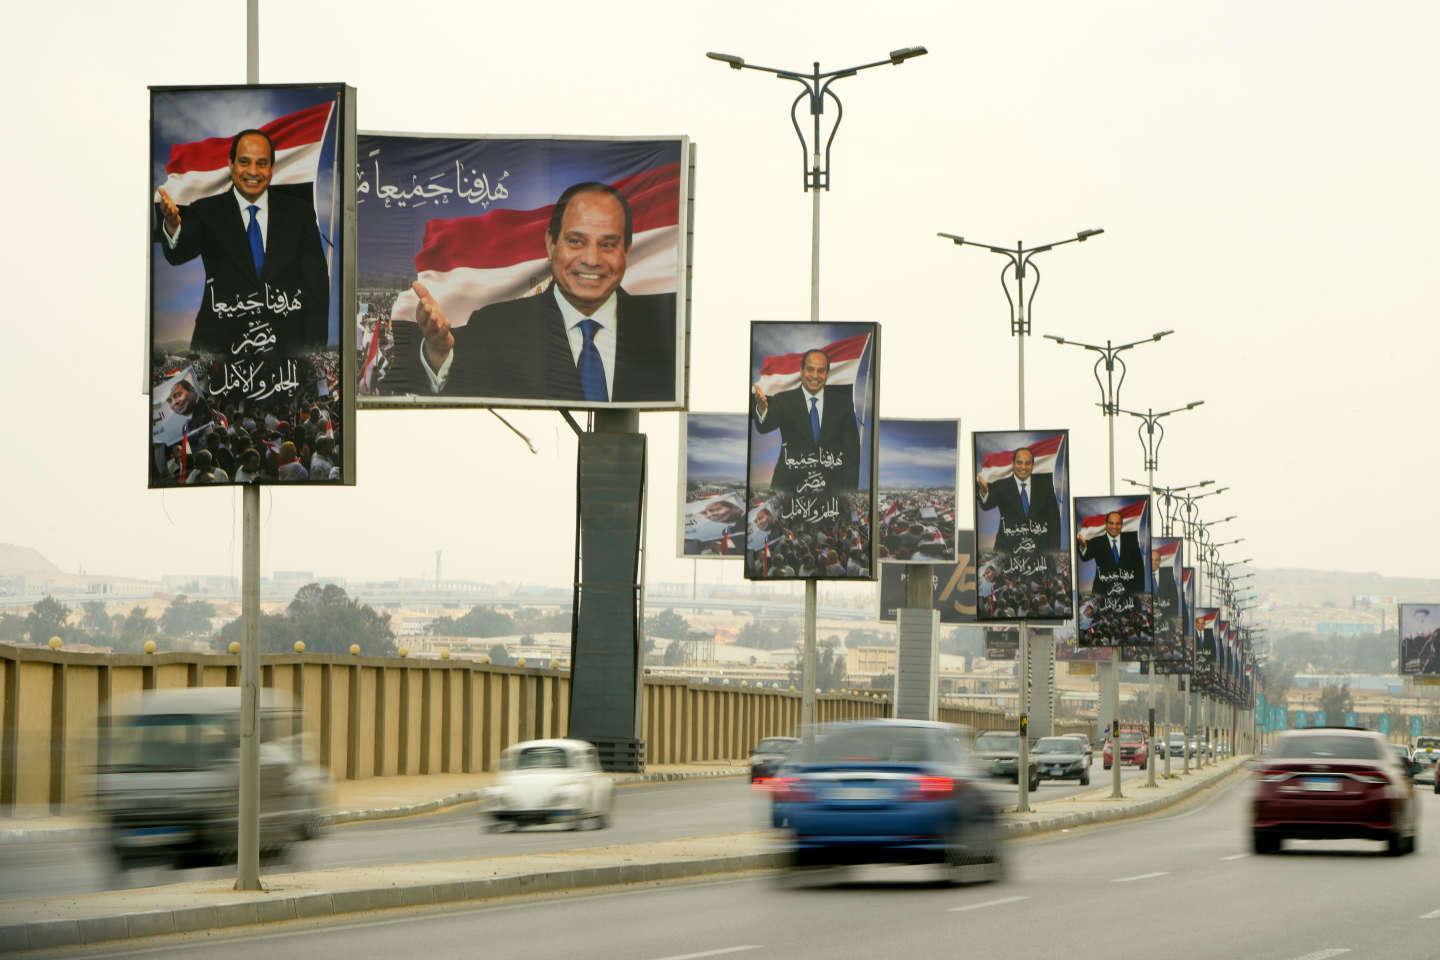 In Egypt, Marshal Sisi’s dreams of grandeur shattered by the setbacks of a bankrupt economy